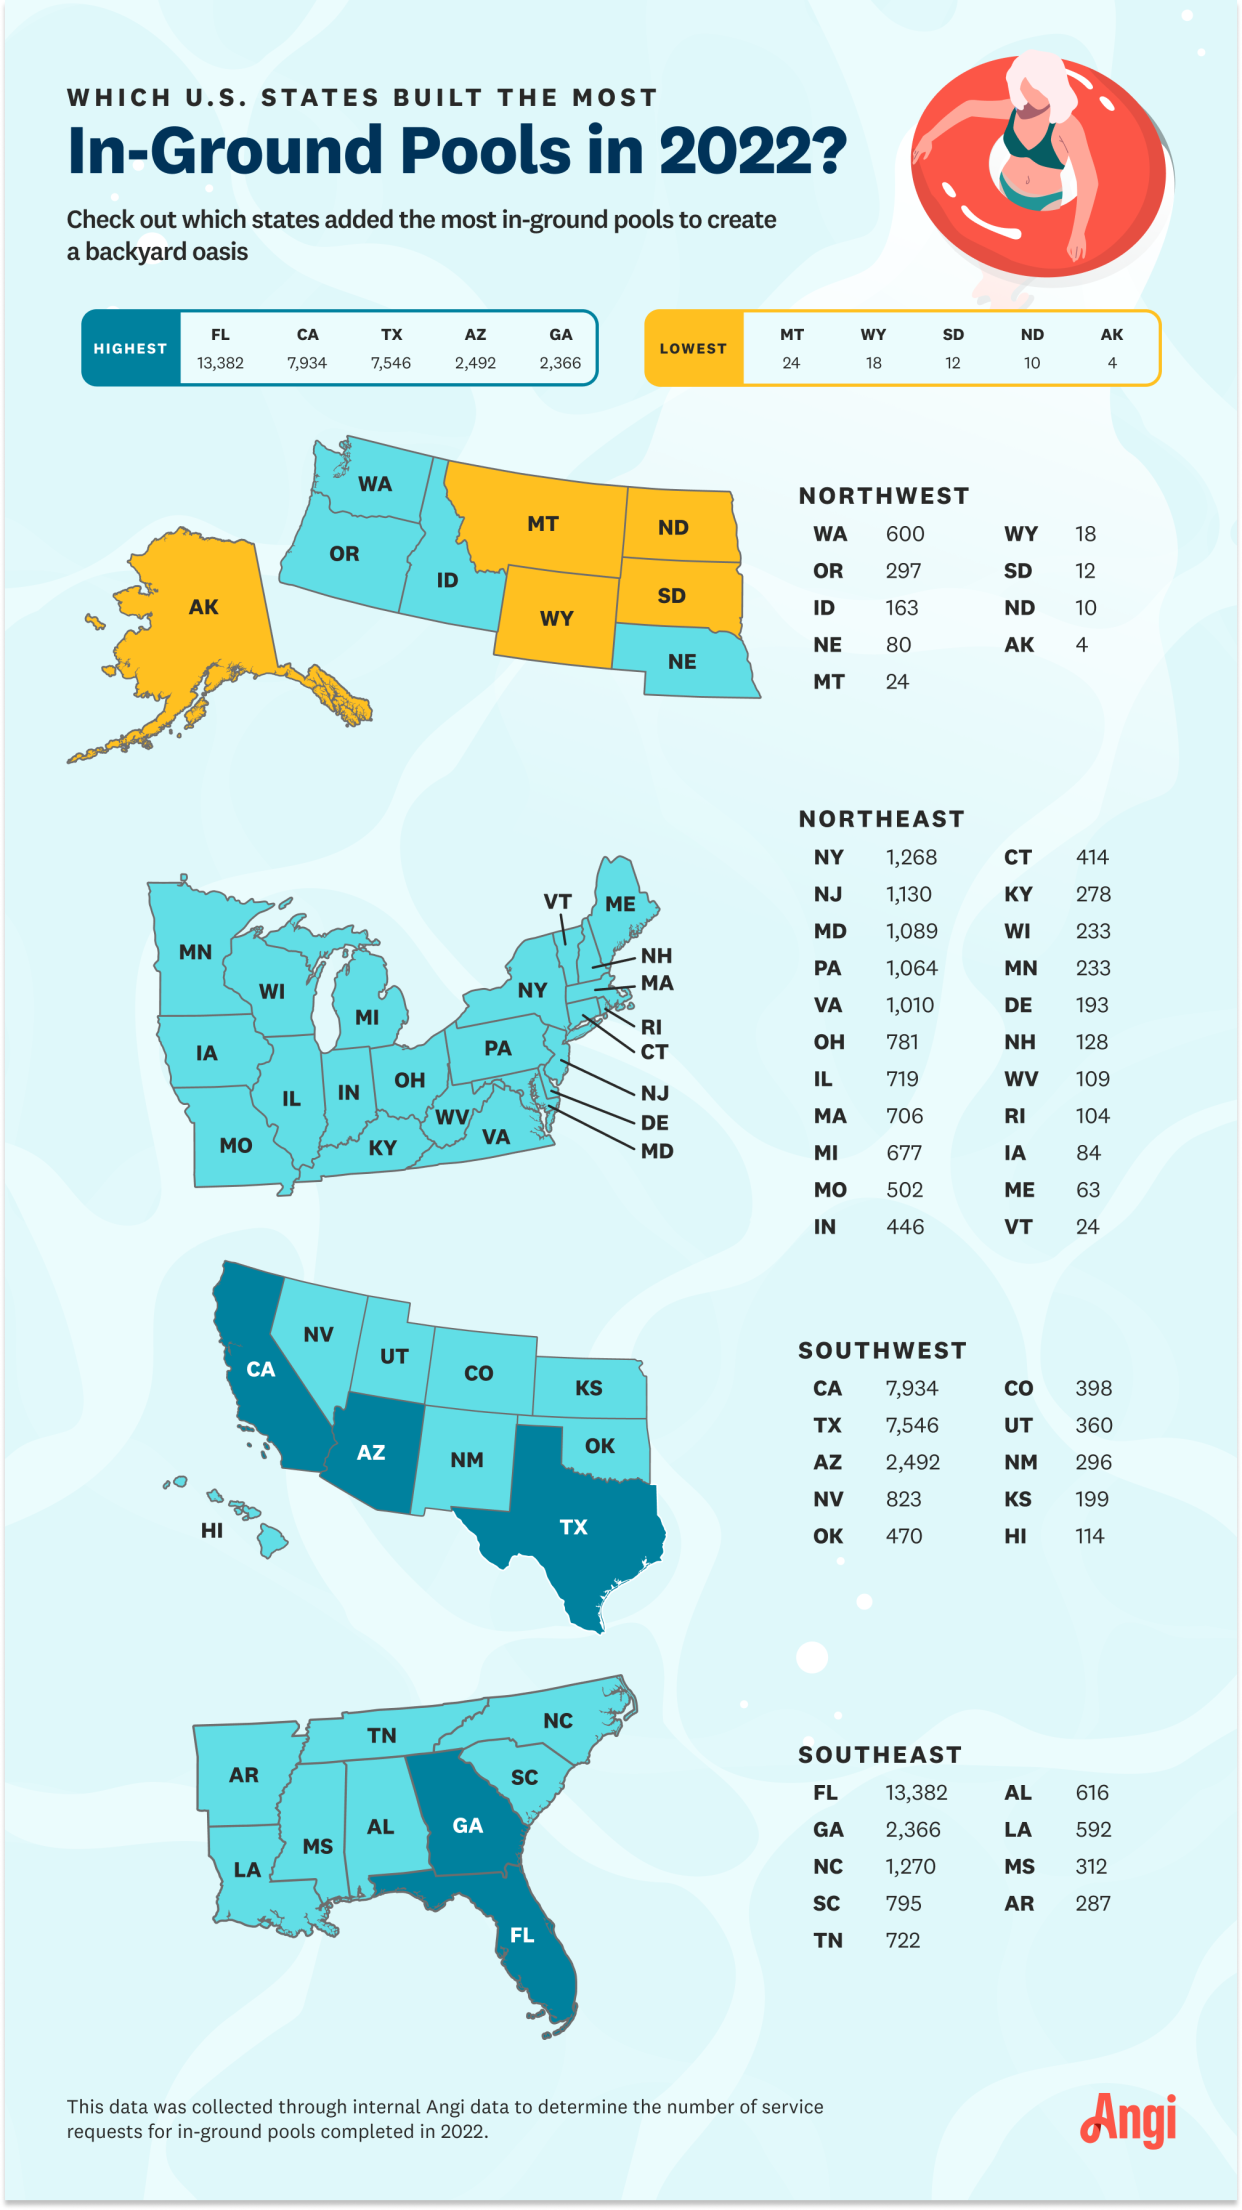 Infographic showing states with the most in-ground pools built in 2022, with the top 5 being Florida, California, Texas, Arizona, and Georgia